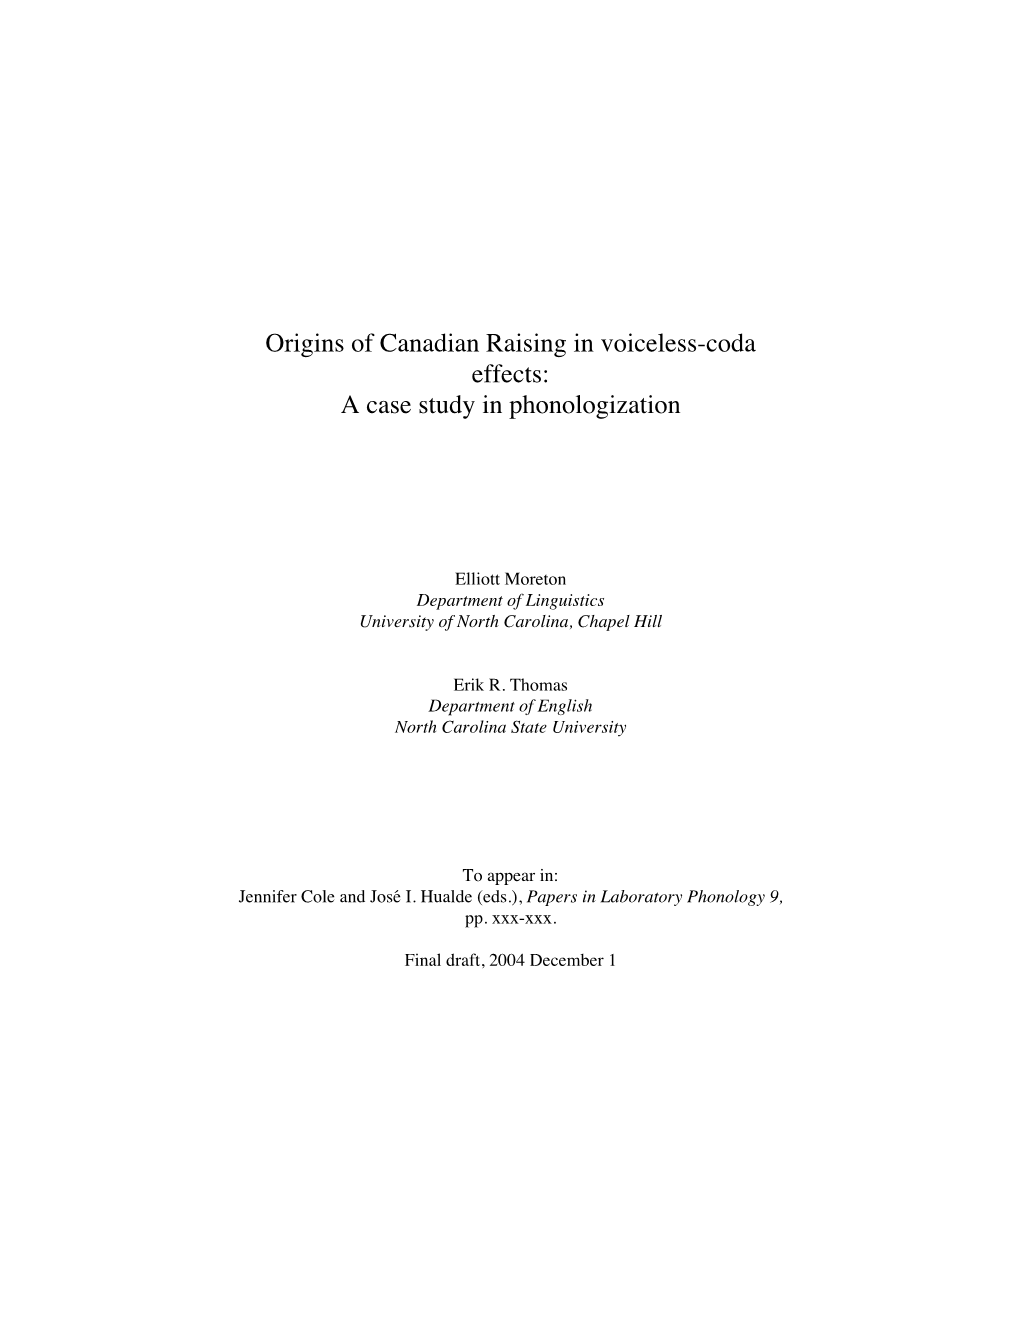 Origins of Canadian Raising in Voiceless-Coda Effects: a Case Study in Phonologization